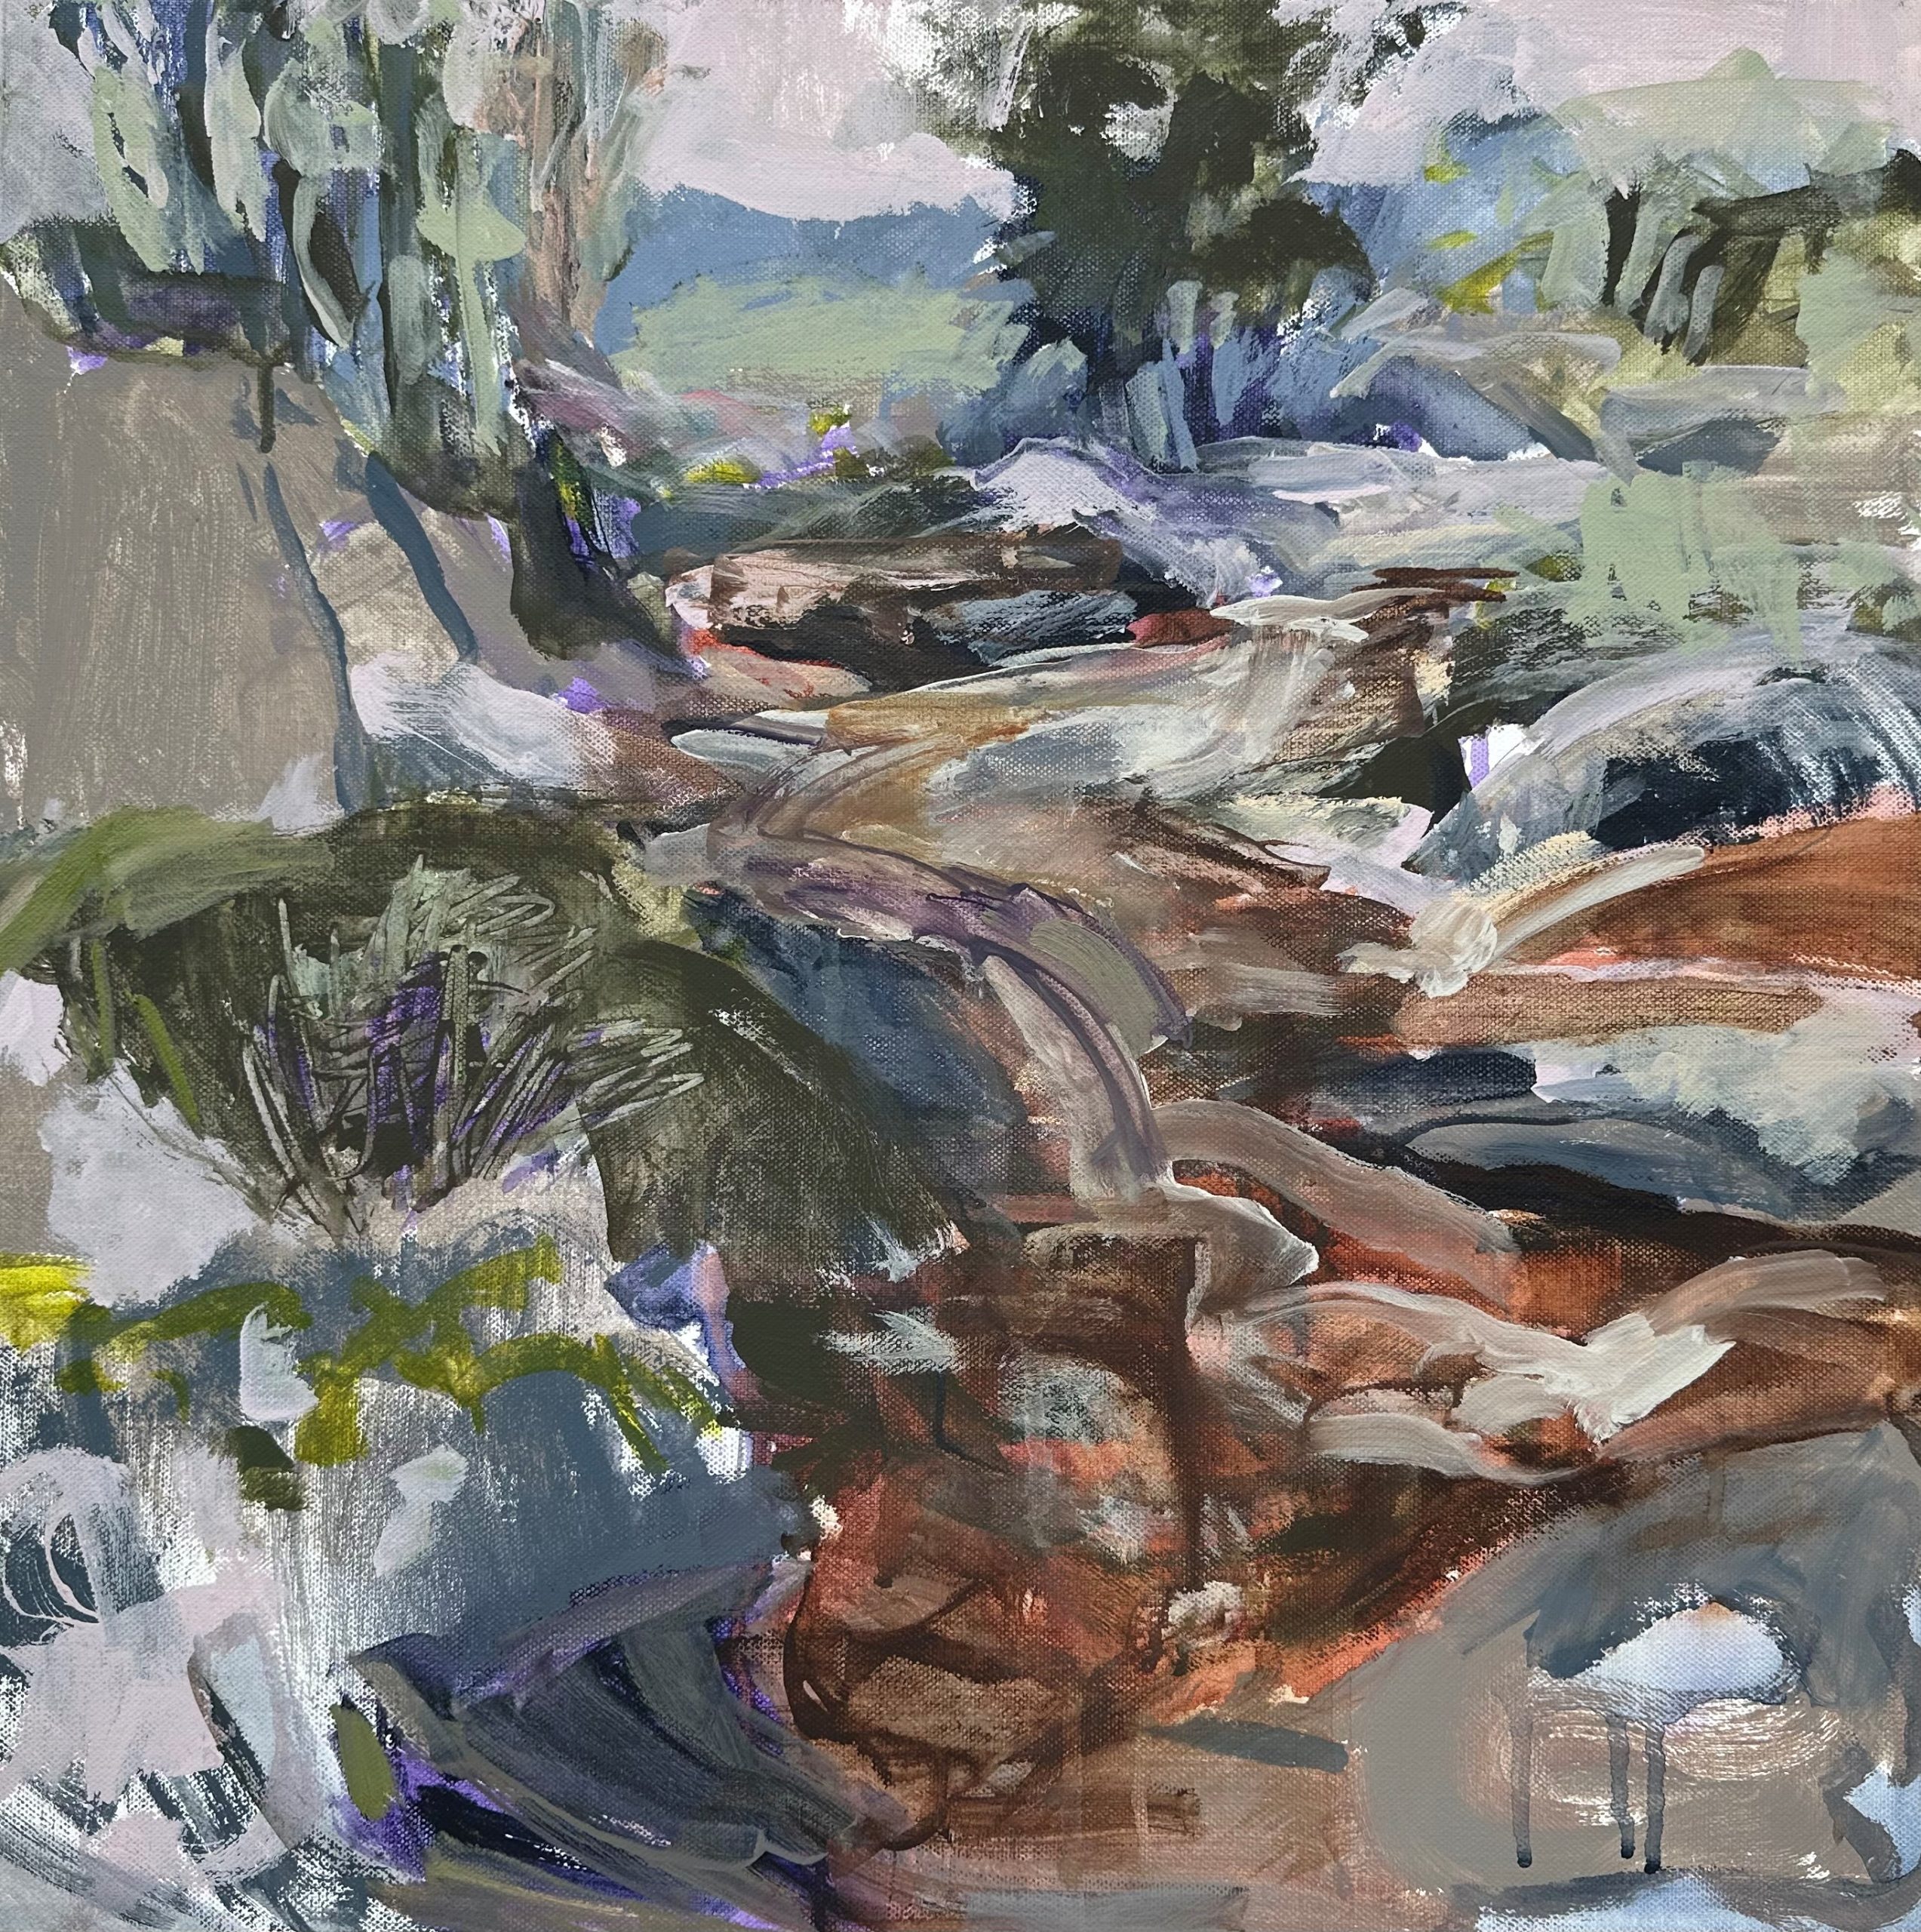 Kerry McInnis 'Granite Creek' oil and acrylic on canvas 52 x 52cm $3,600 SOLD